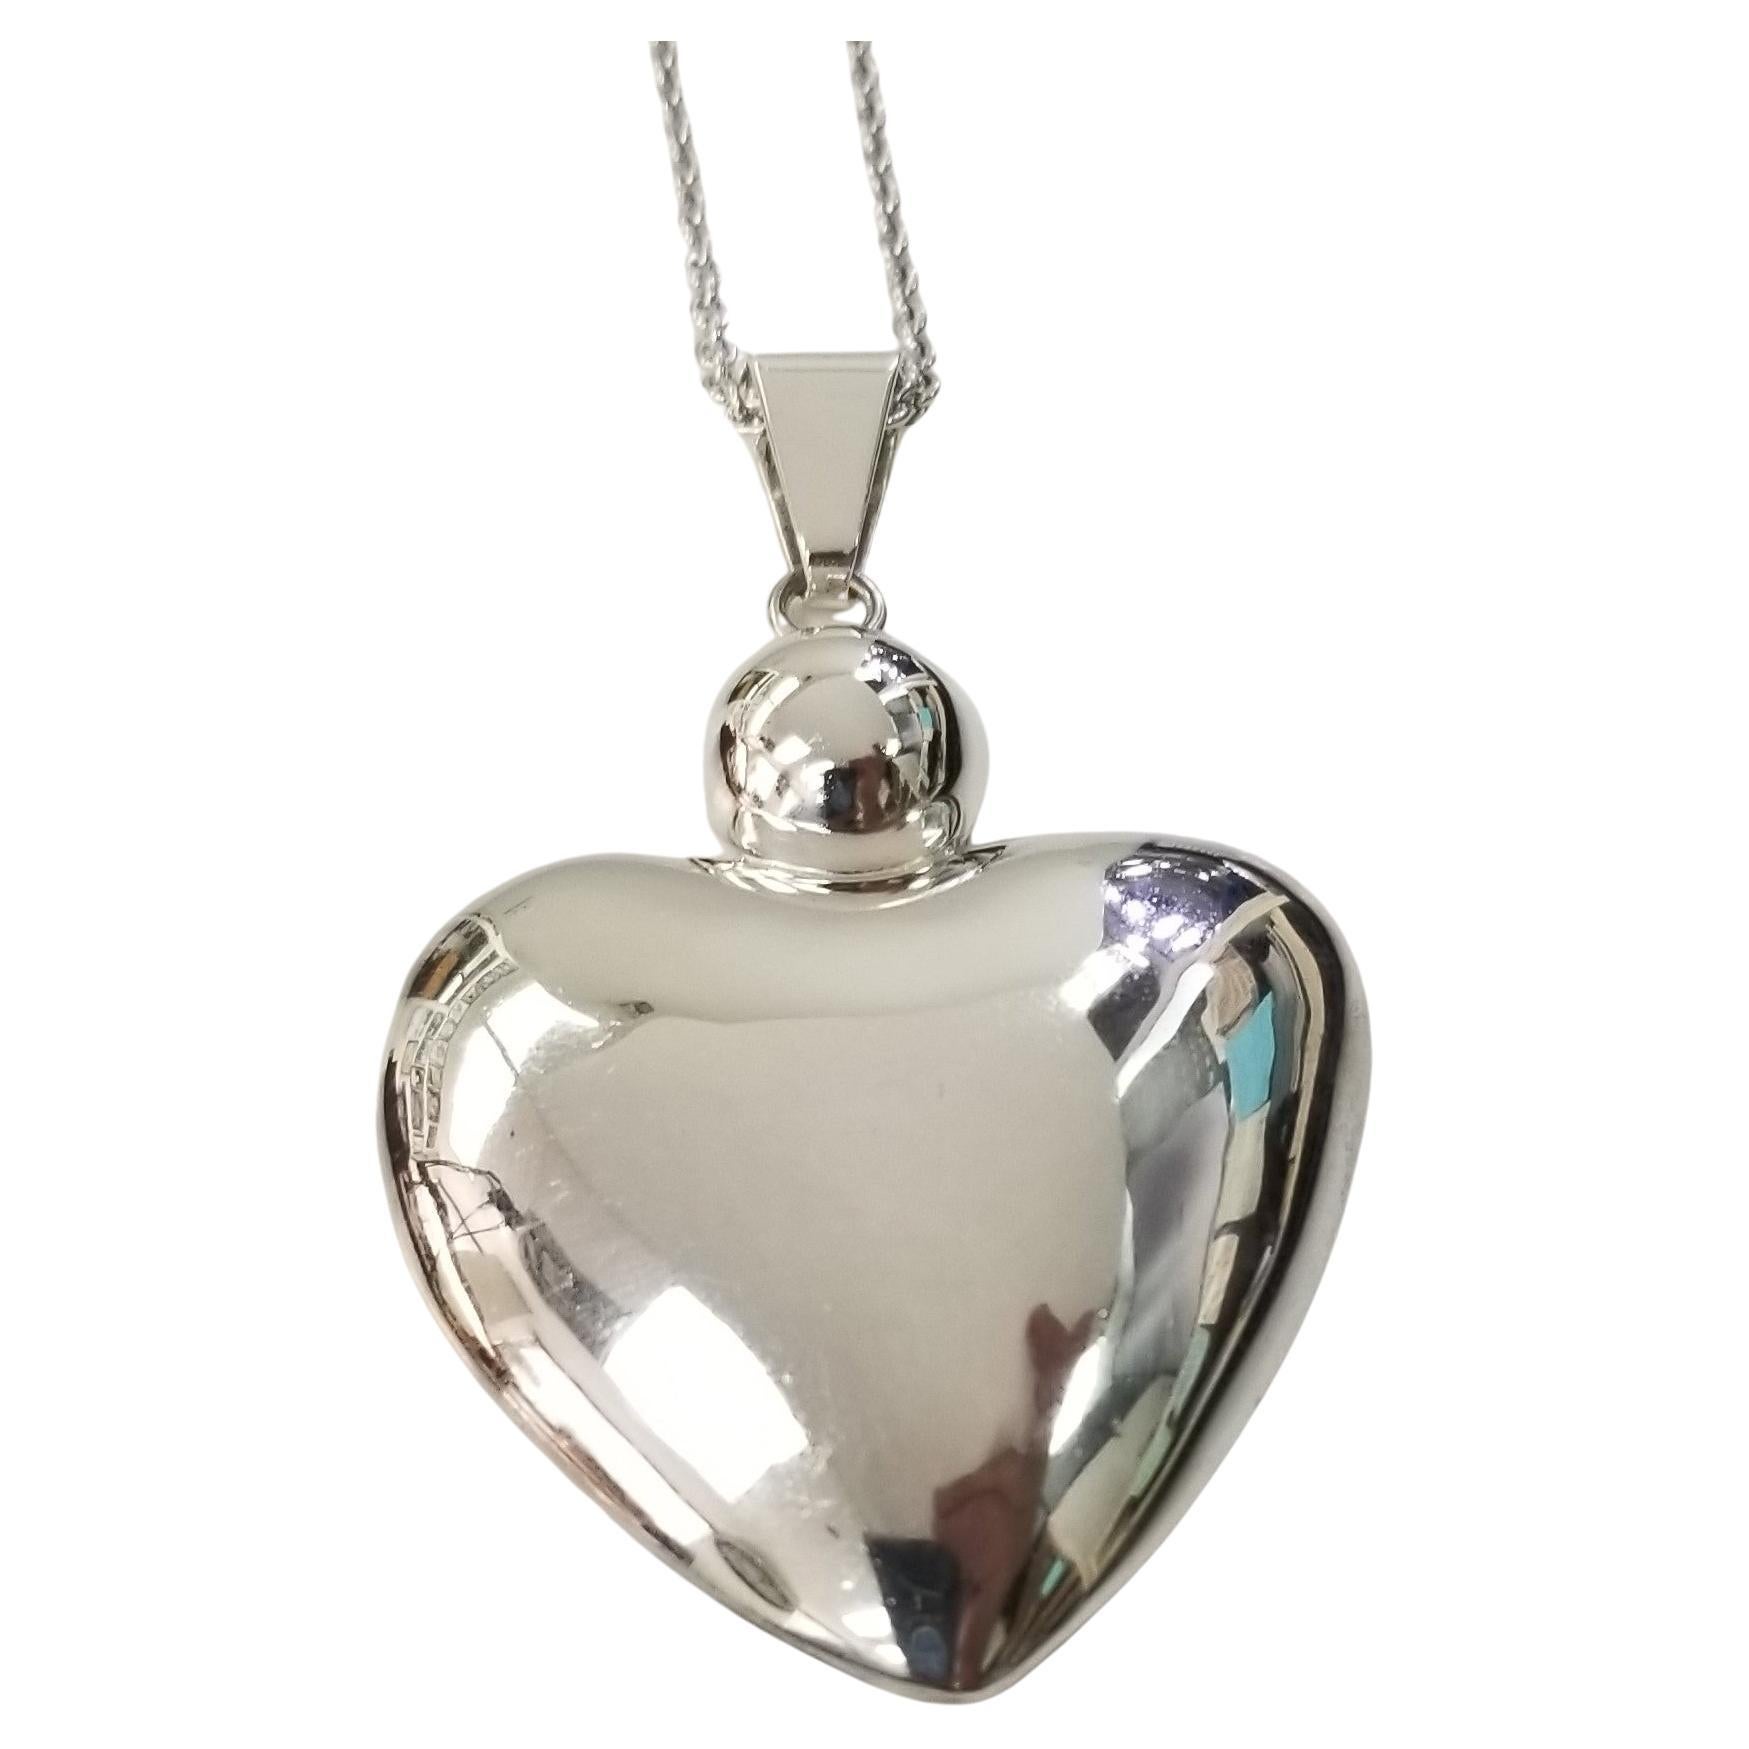 Silver Extra Large Puffed Heart Pendant 2 inch by 2 1/2 inch 46 Grams